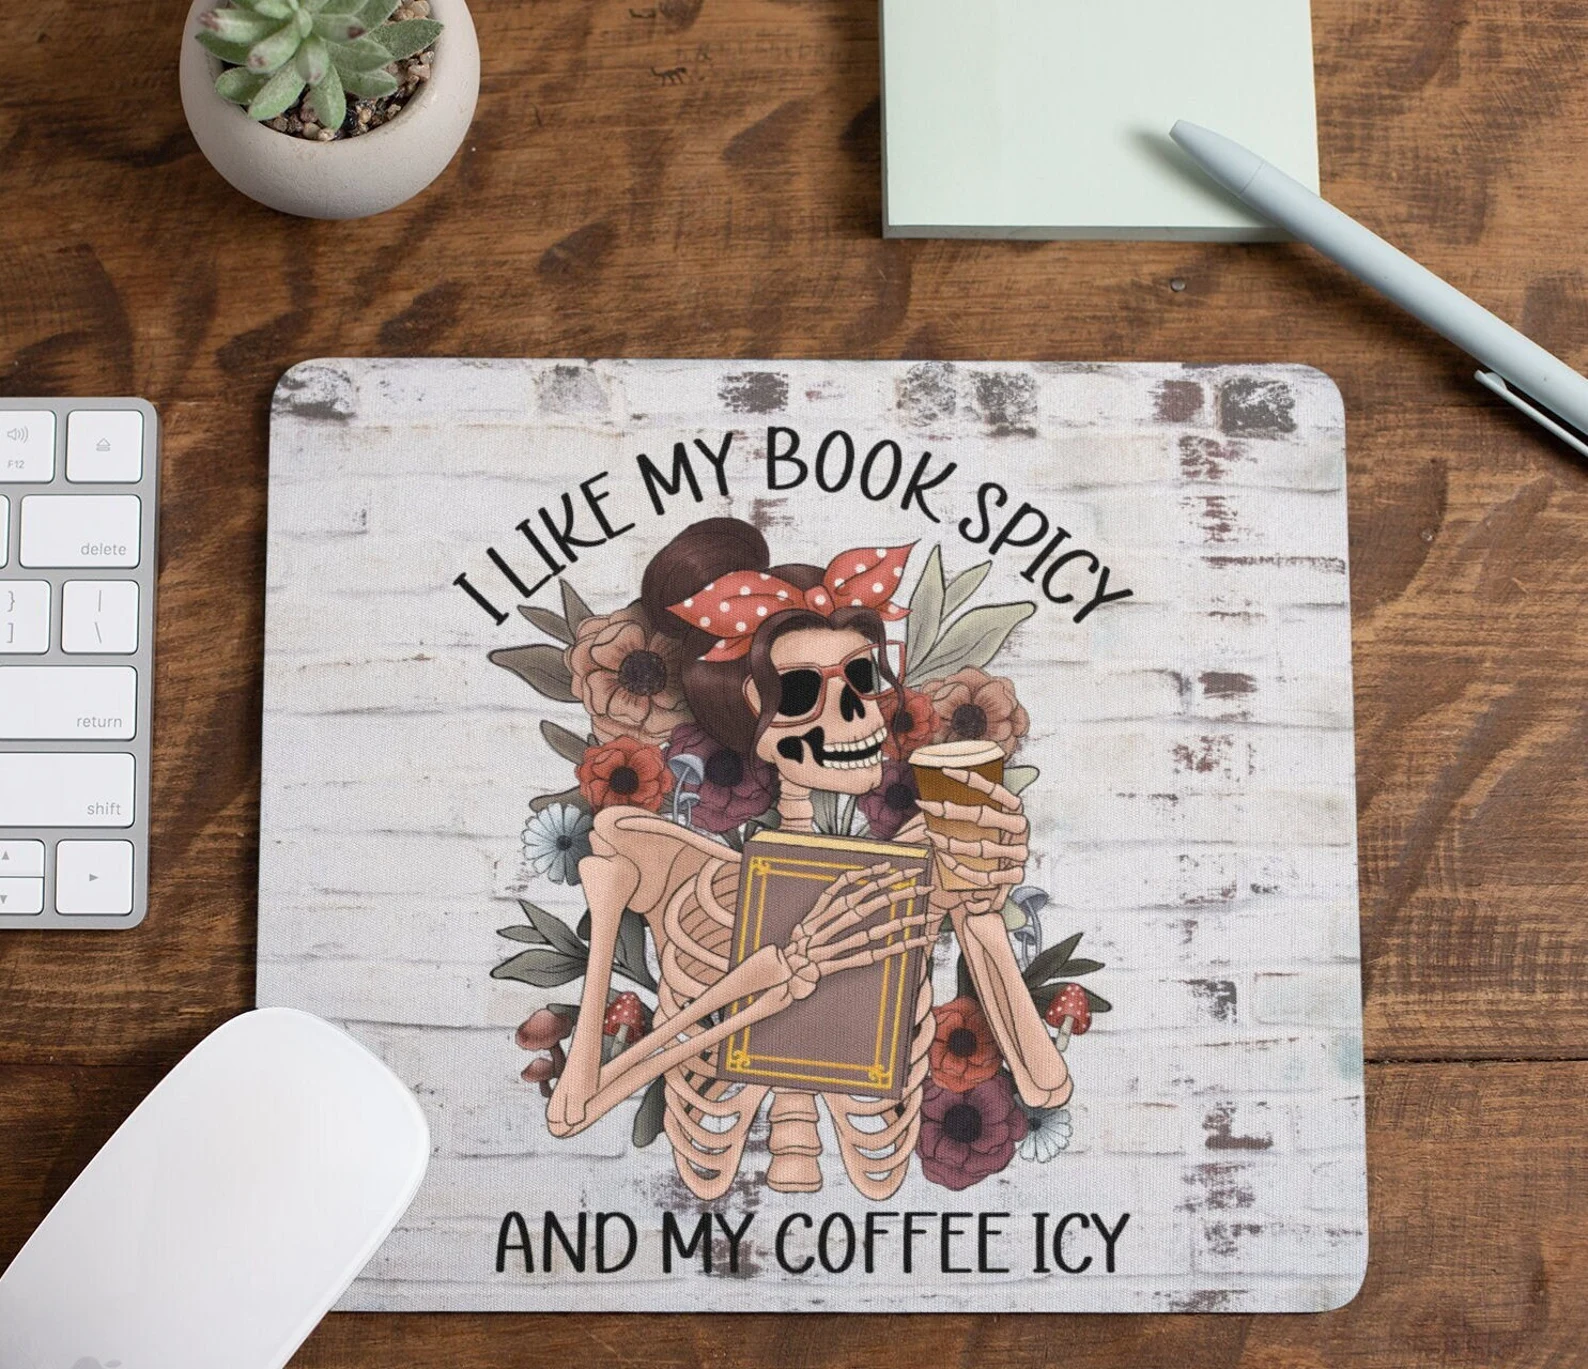 a mousepad with a skeleton with hair against a backdrop of flowers holding a book and iced coffee that reads "I like my books spicy and my coffee icy"